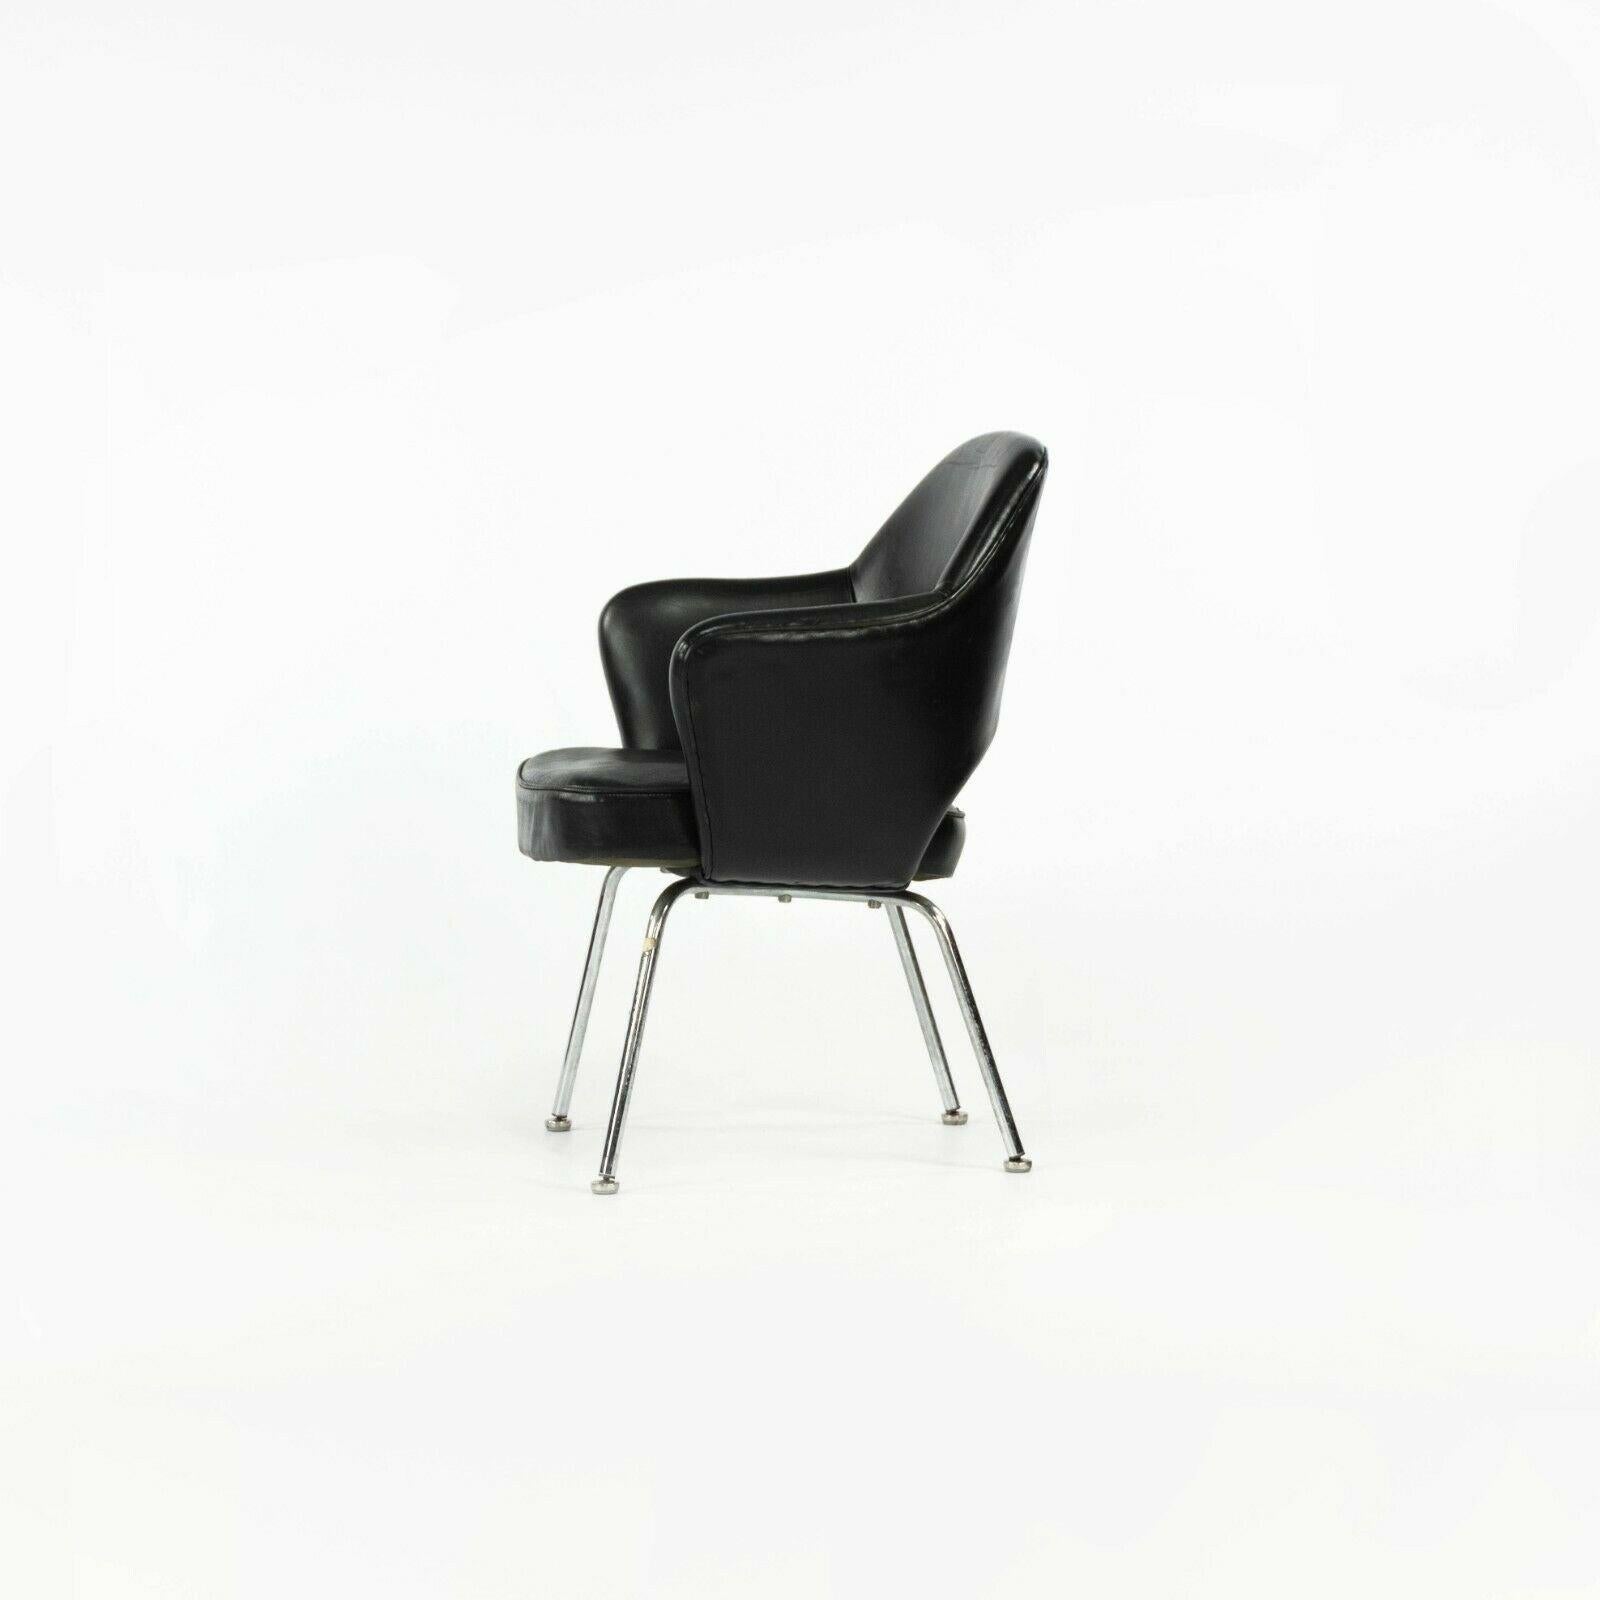 1960s Eero Saarinen for Knoll Executive Dining Arm Chair in Black Leather For Sale 1